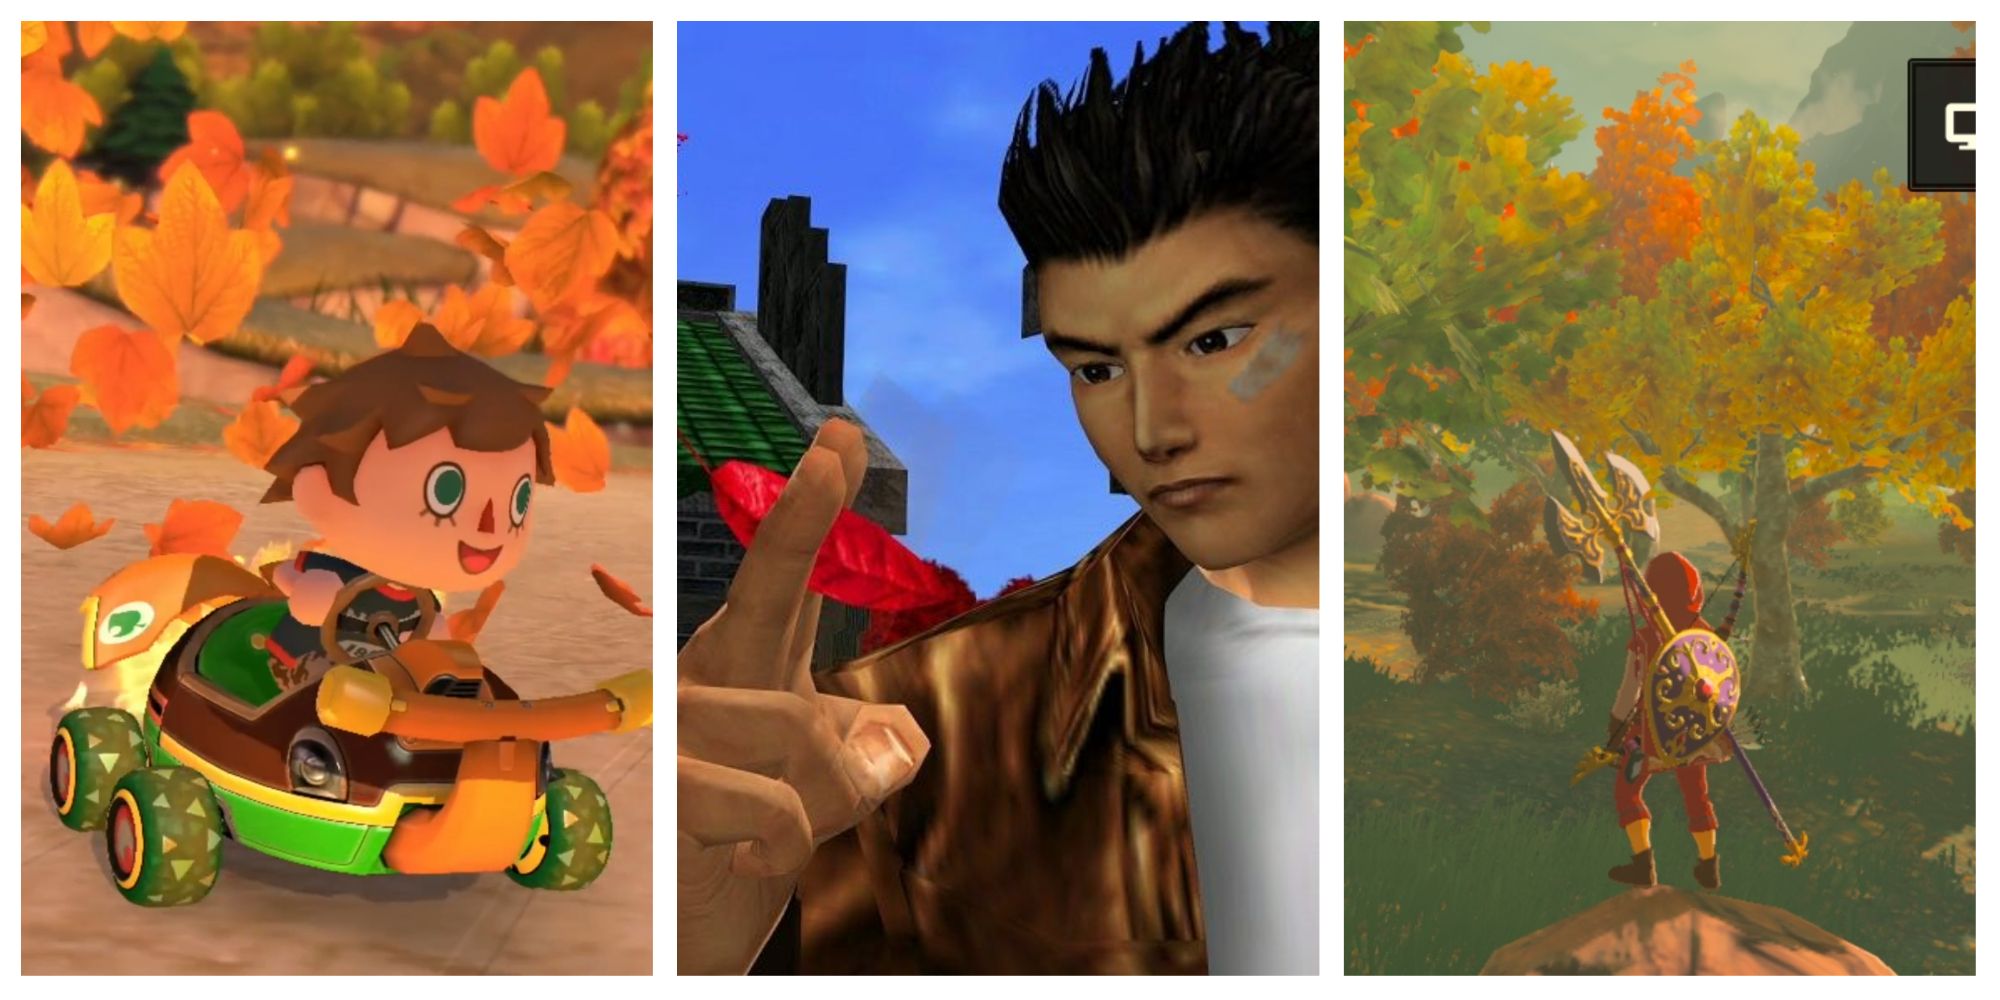 Left: An Animal Crossing villager driving through some leaves in Mario Kart 8. Center: Ryo holding a red leaf between his middle and pointer finger in Shenmue 2. Right: Link (from behind) looking at fall foliage in The Legend of Zelda: Breath of the Wild. Image sources: Game ZXC and Terrence Smith.